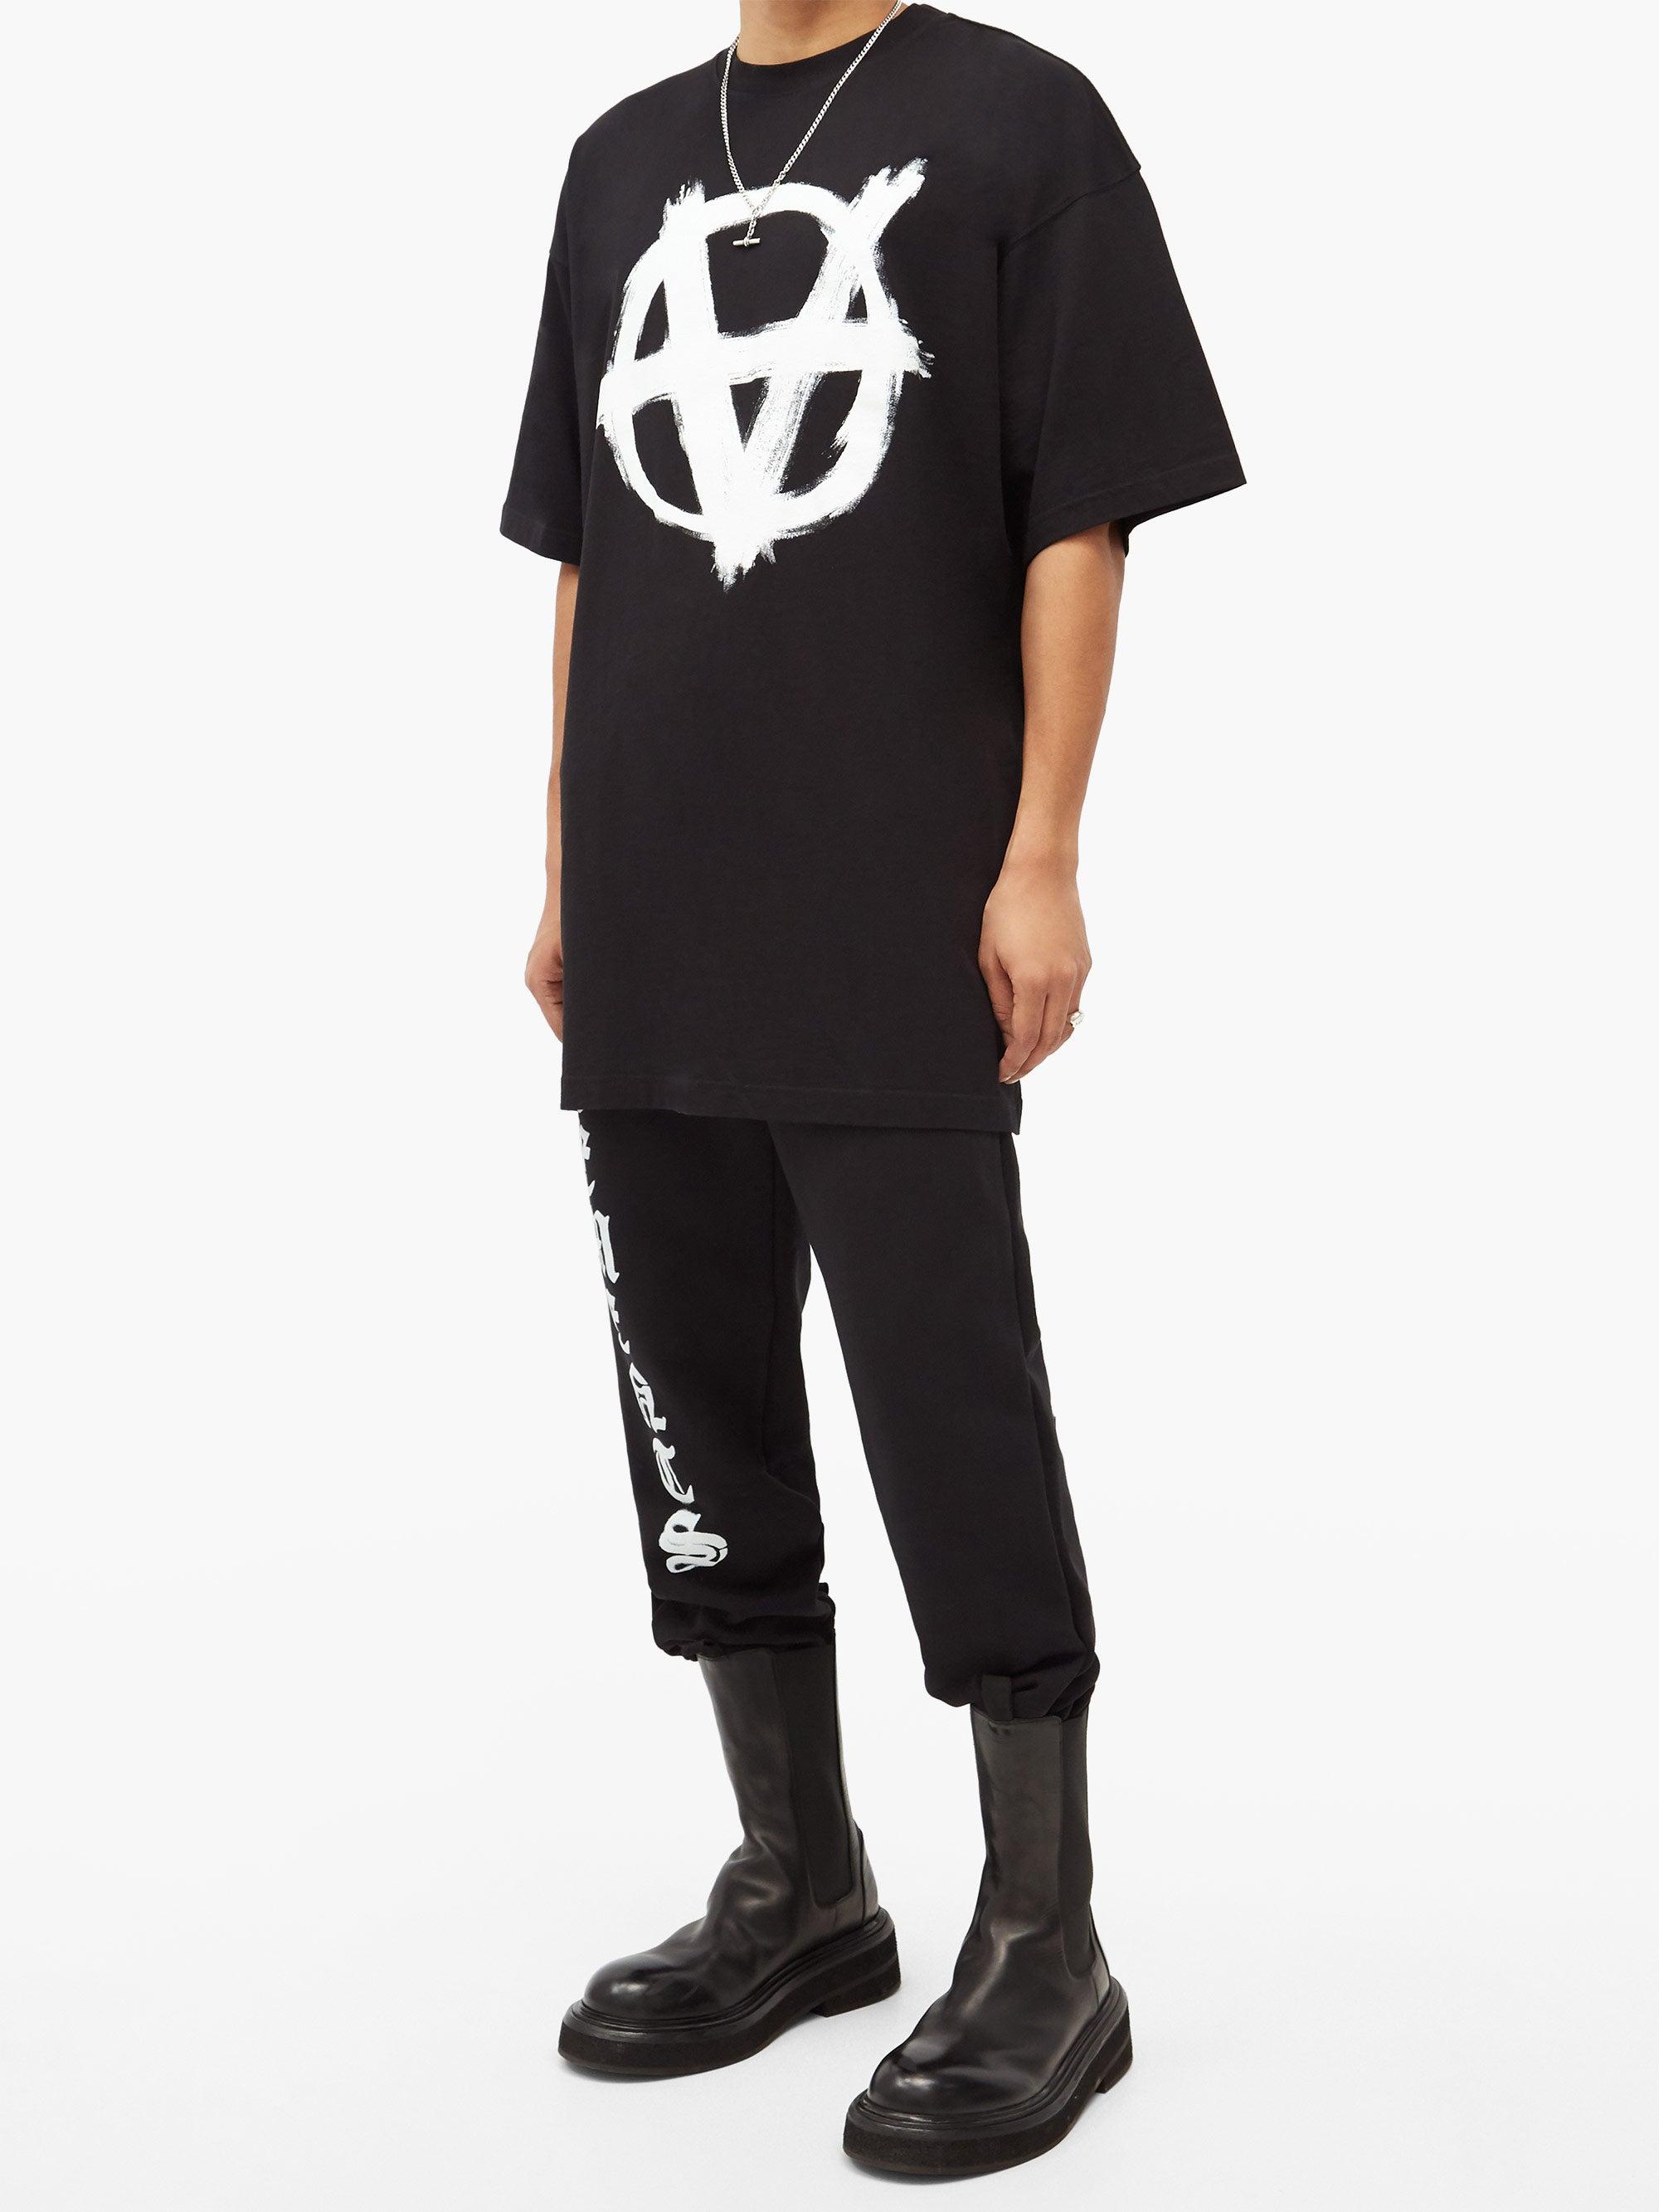 Vetements Anarchy Printed Cotton-jersey T-shirt in Black for Men - Lyst